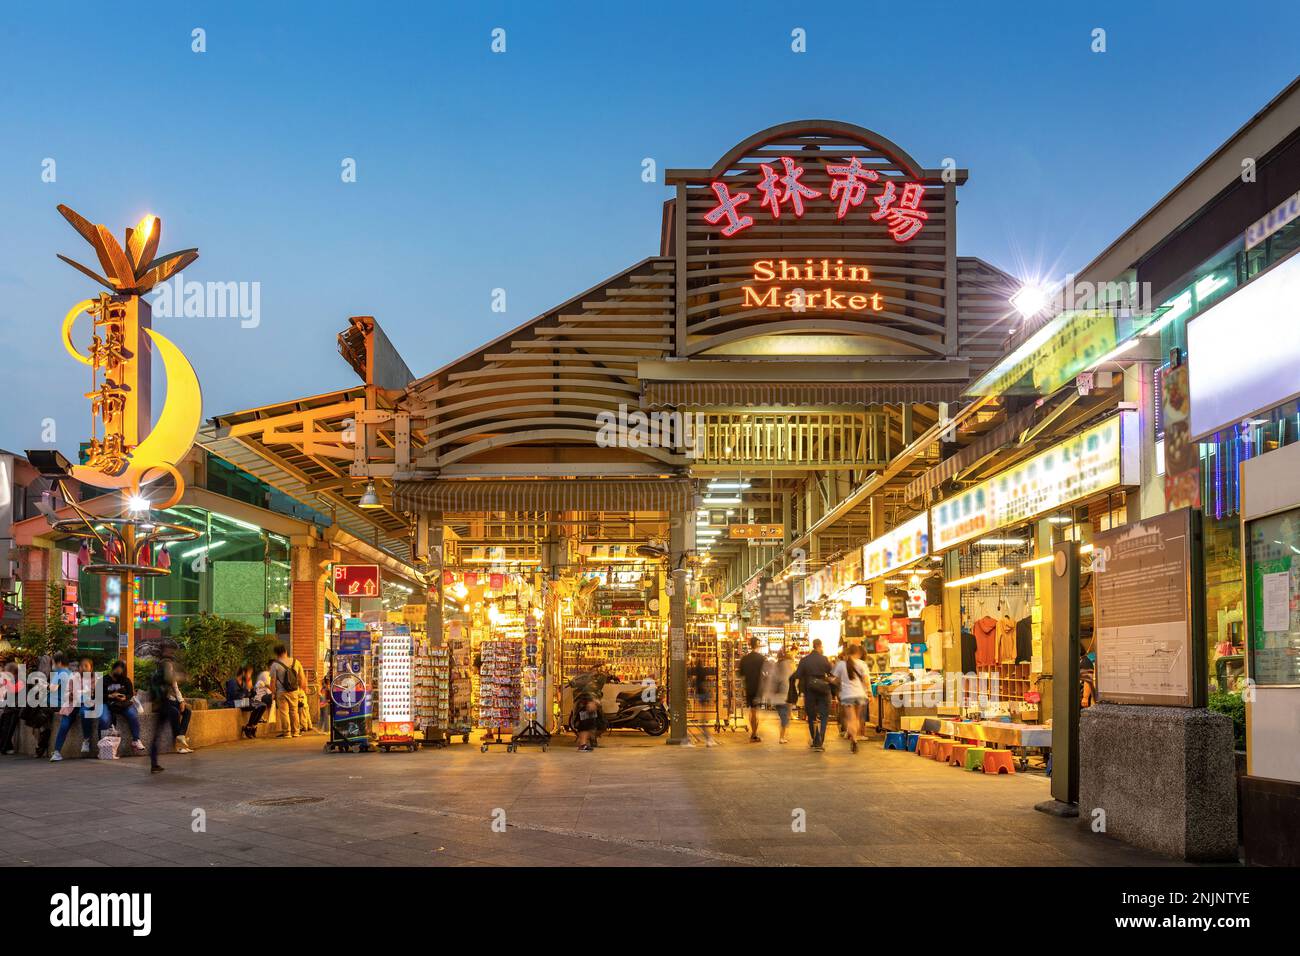 Famous Shilin night market in Taipei, taiwan. the translation of the chinese characters is "shilin market" Stock Photo